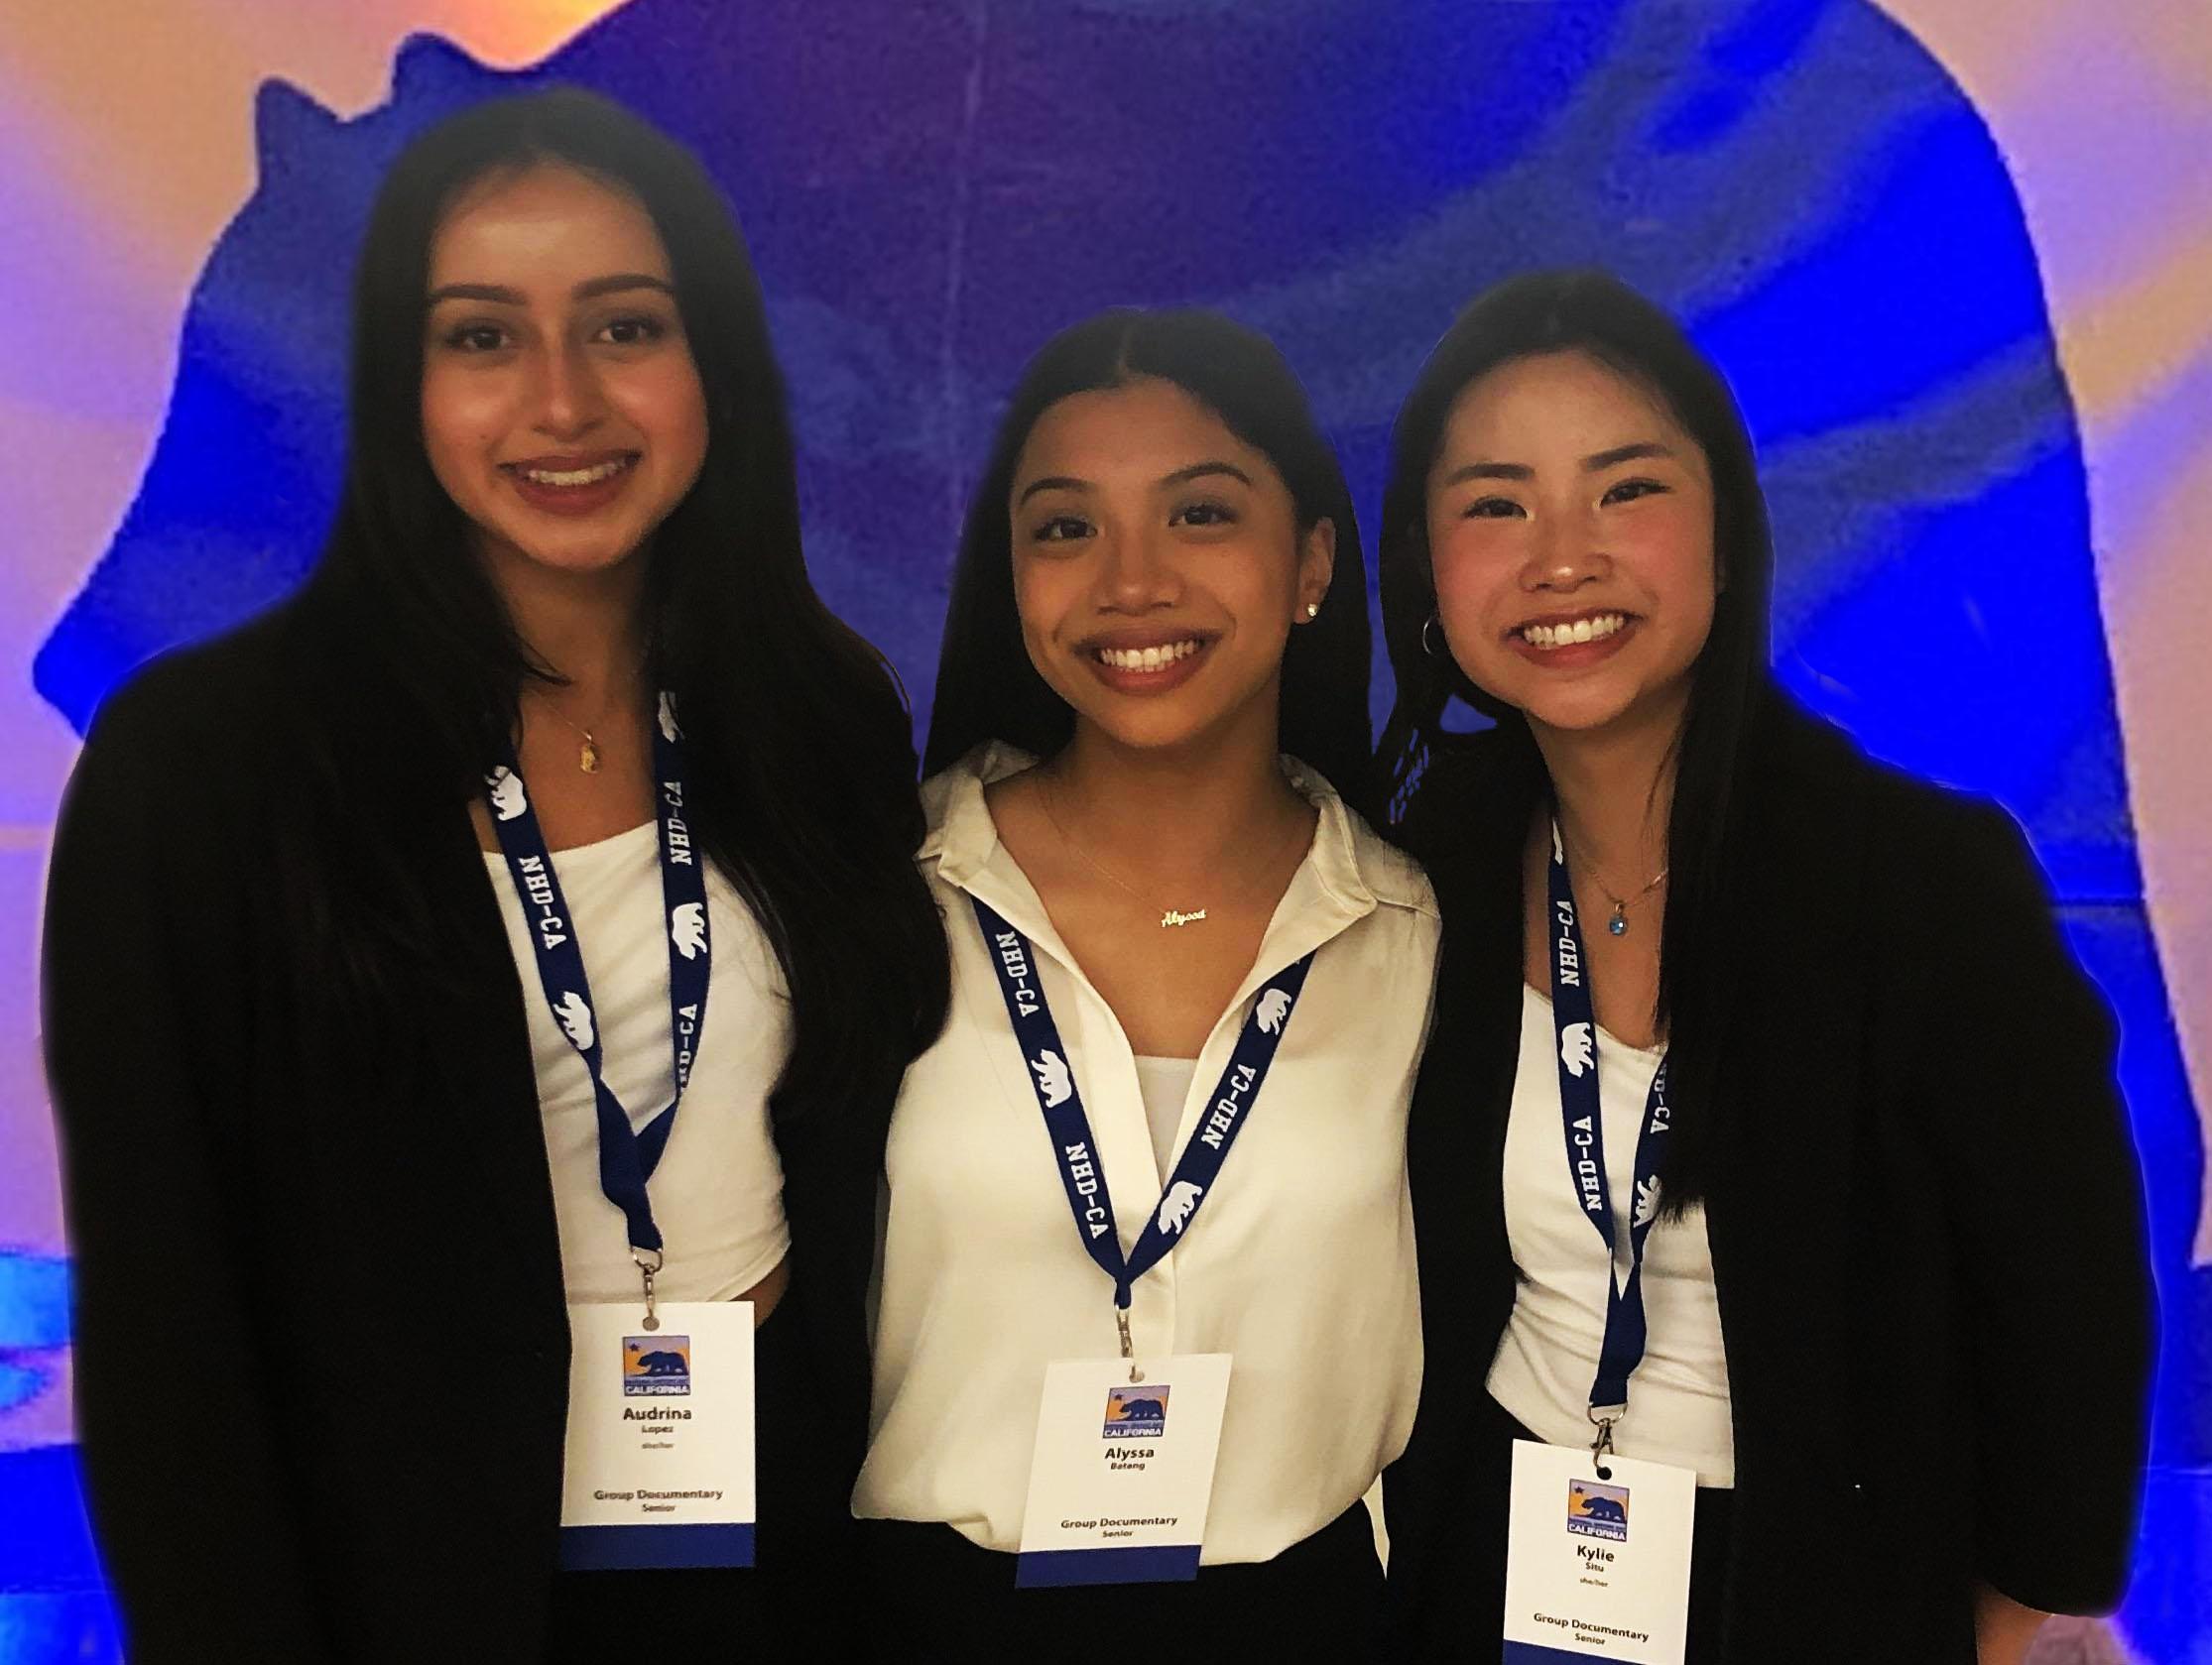 South City High sophomores Audrina Lopez, Alyssa Batang, and Kylie Situ take first place in the group documentary category at the California National History Day contest.